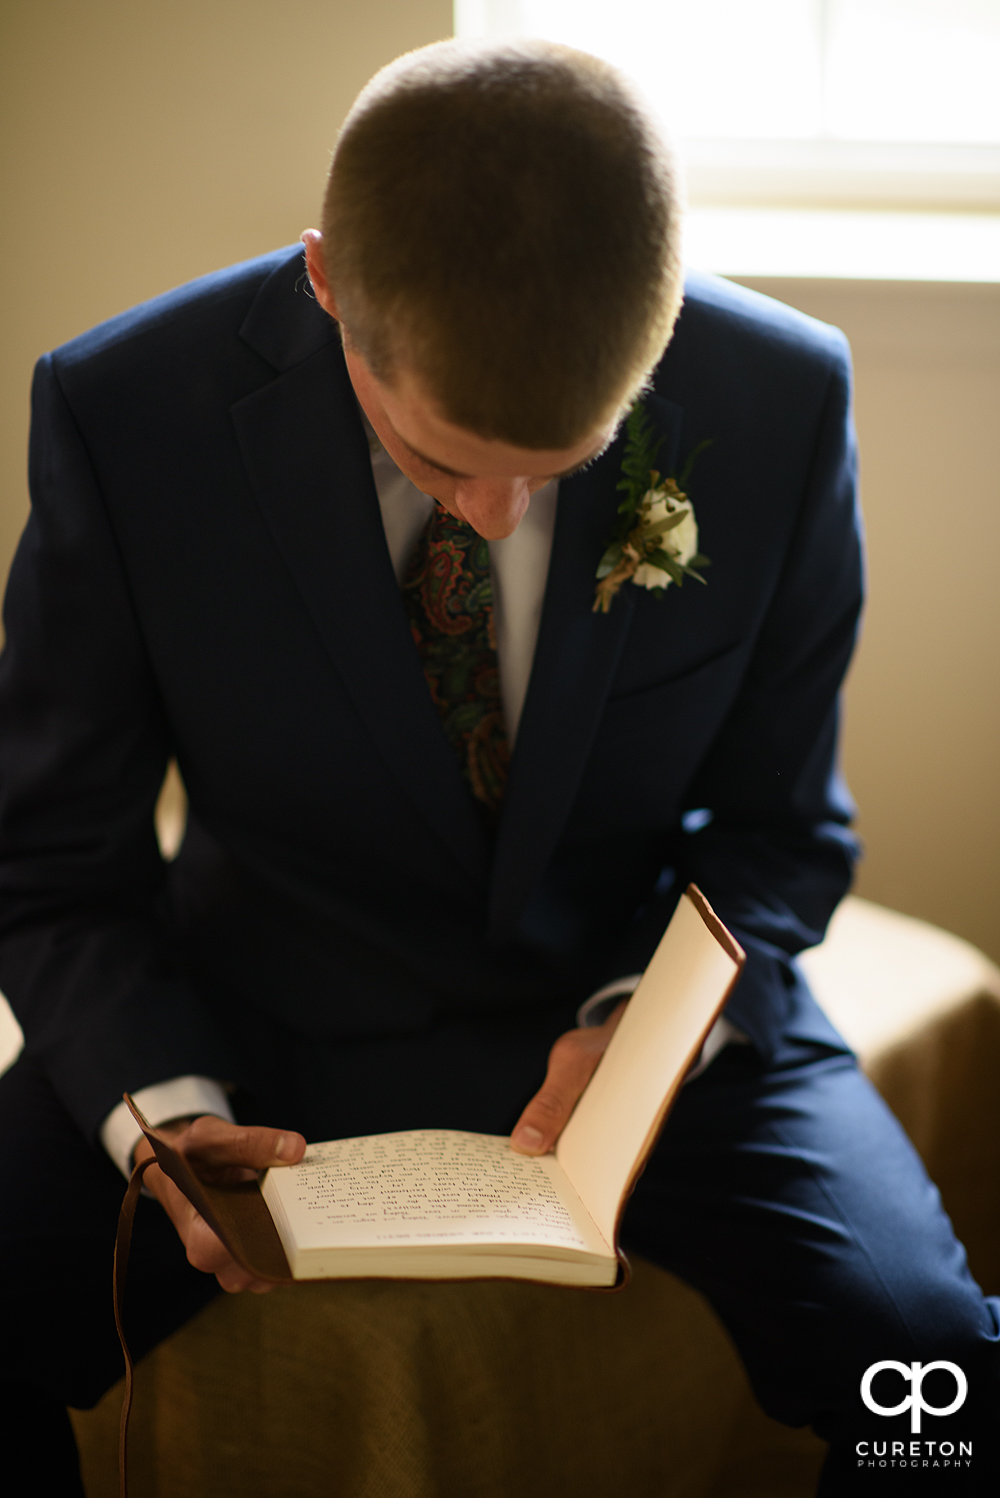 Groom reading a journal from his bride.